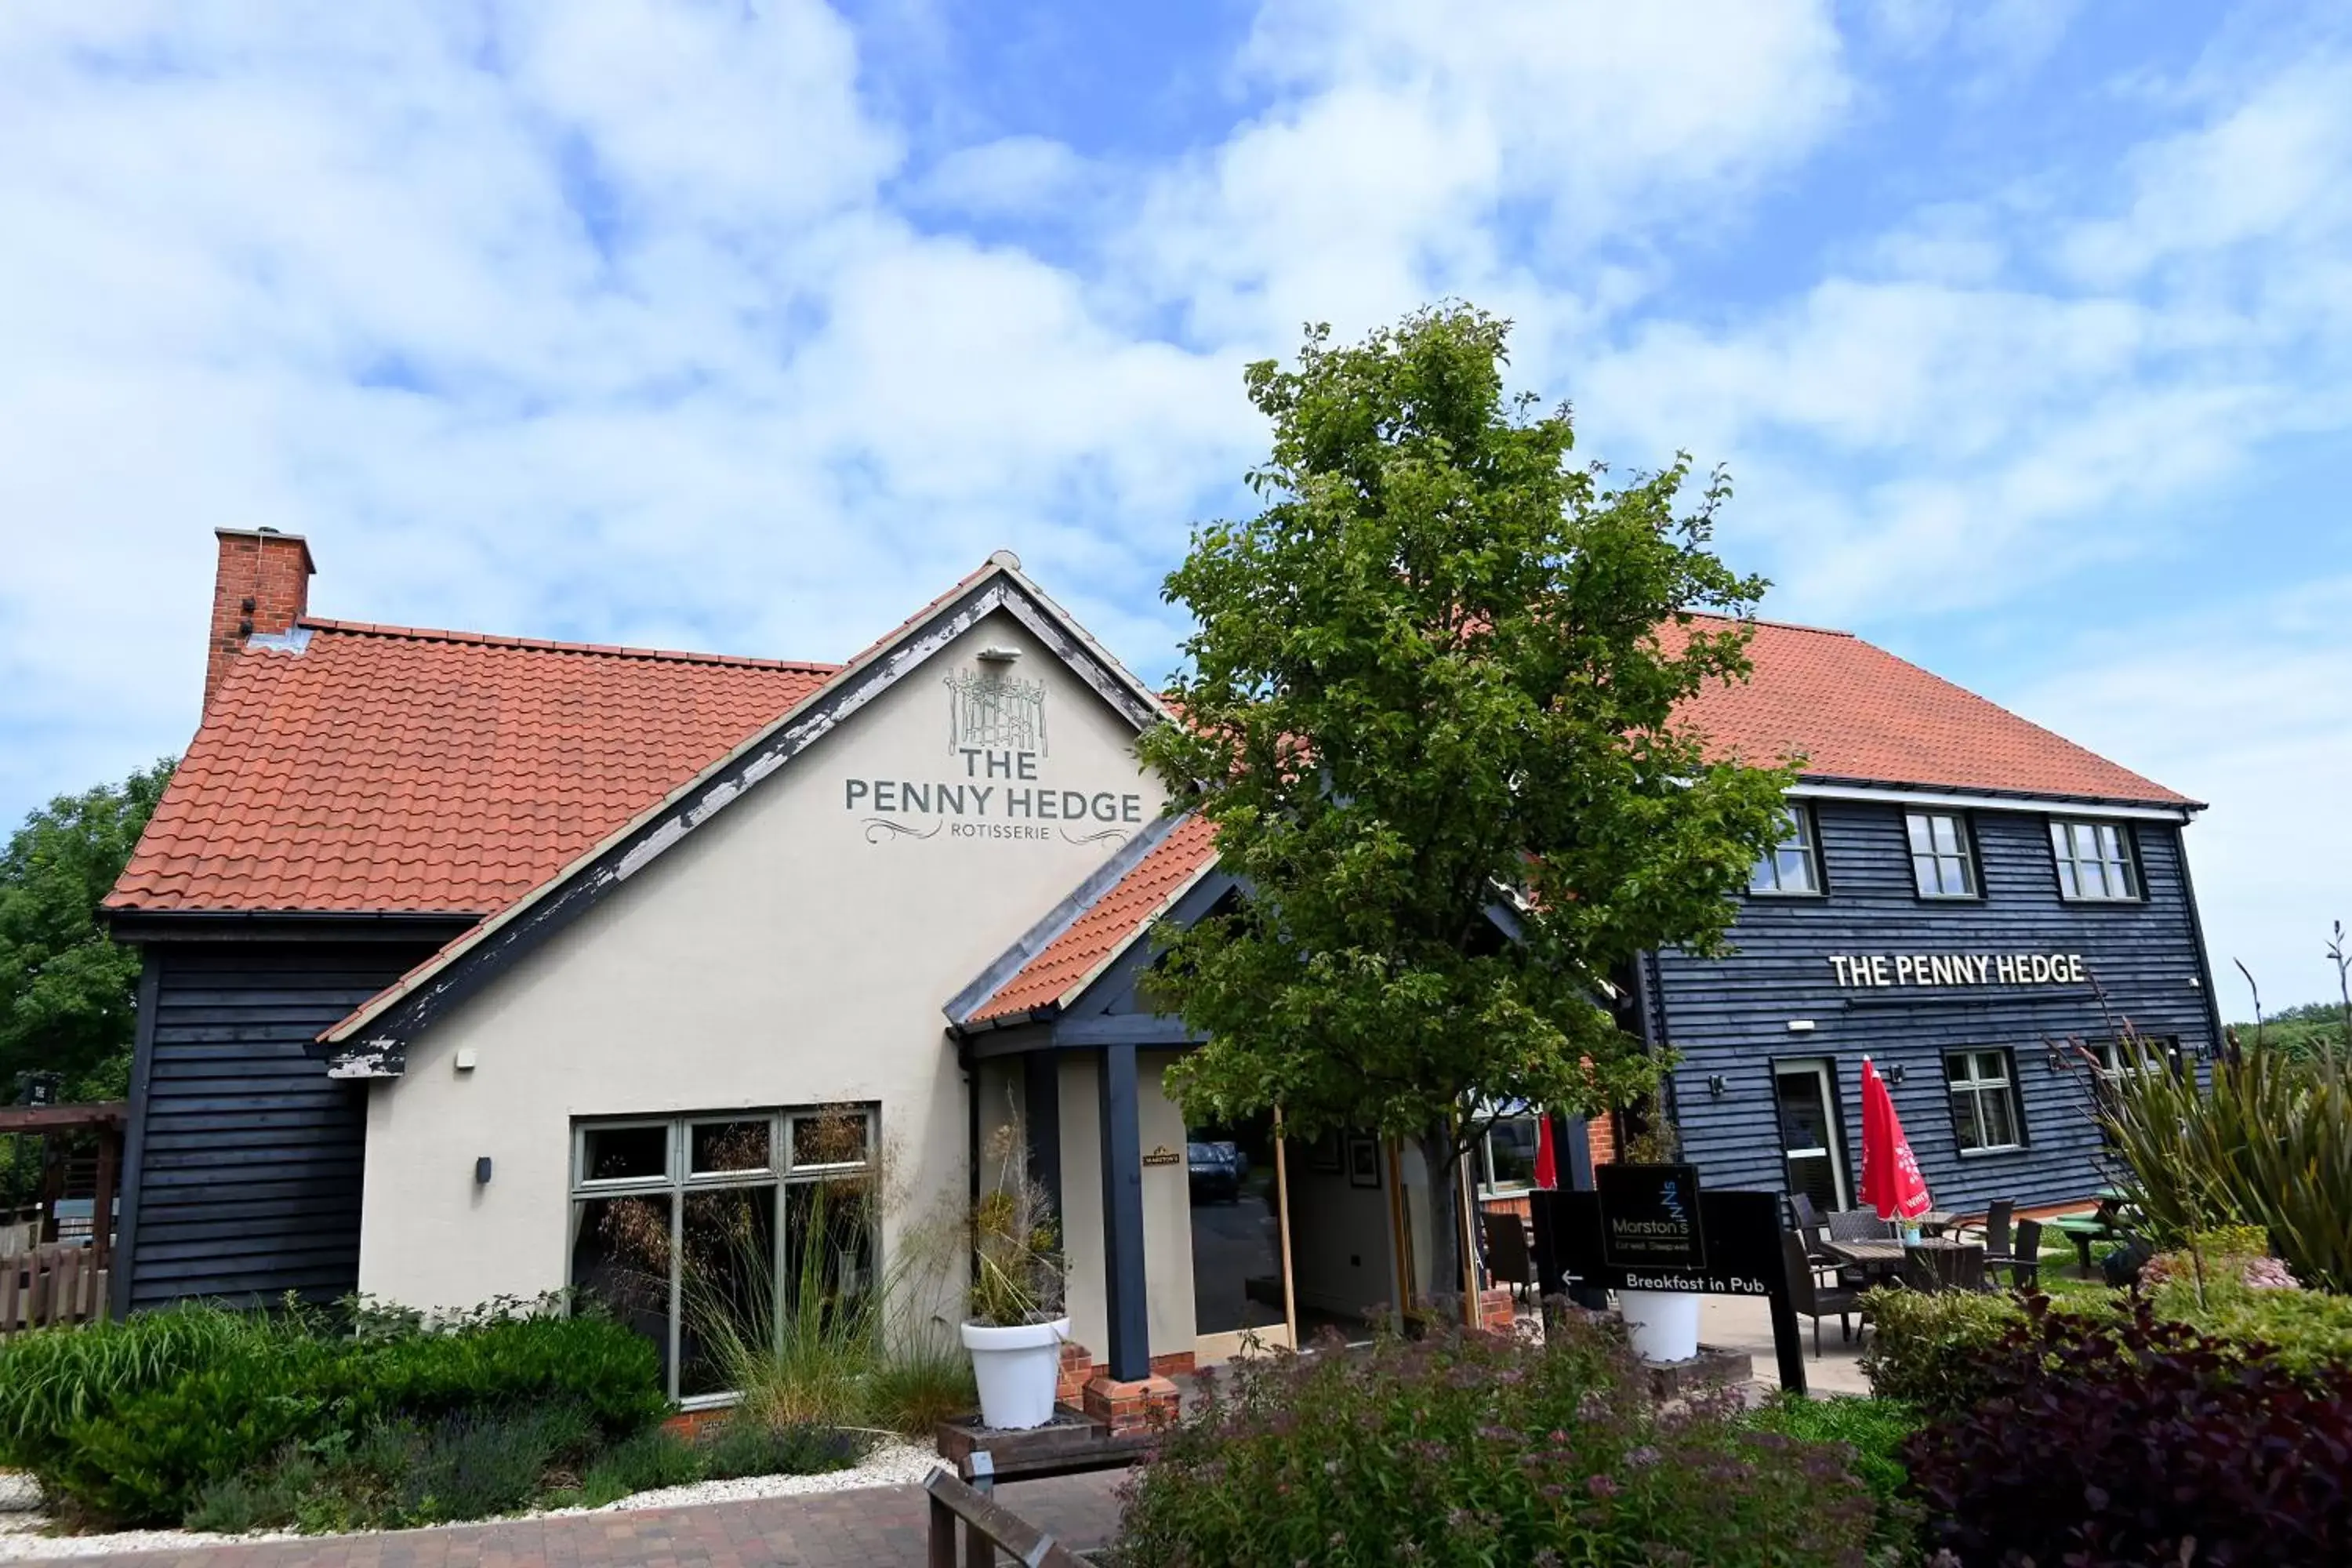 Property Building in Penny Hedge, Whitby by Marston's Inns